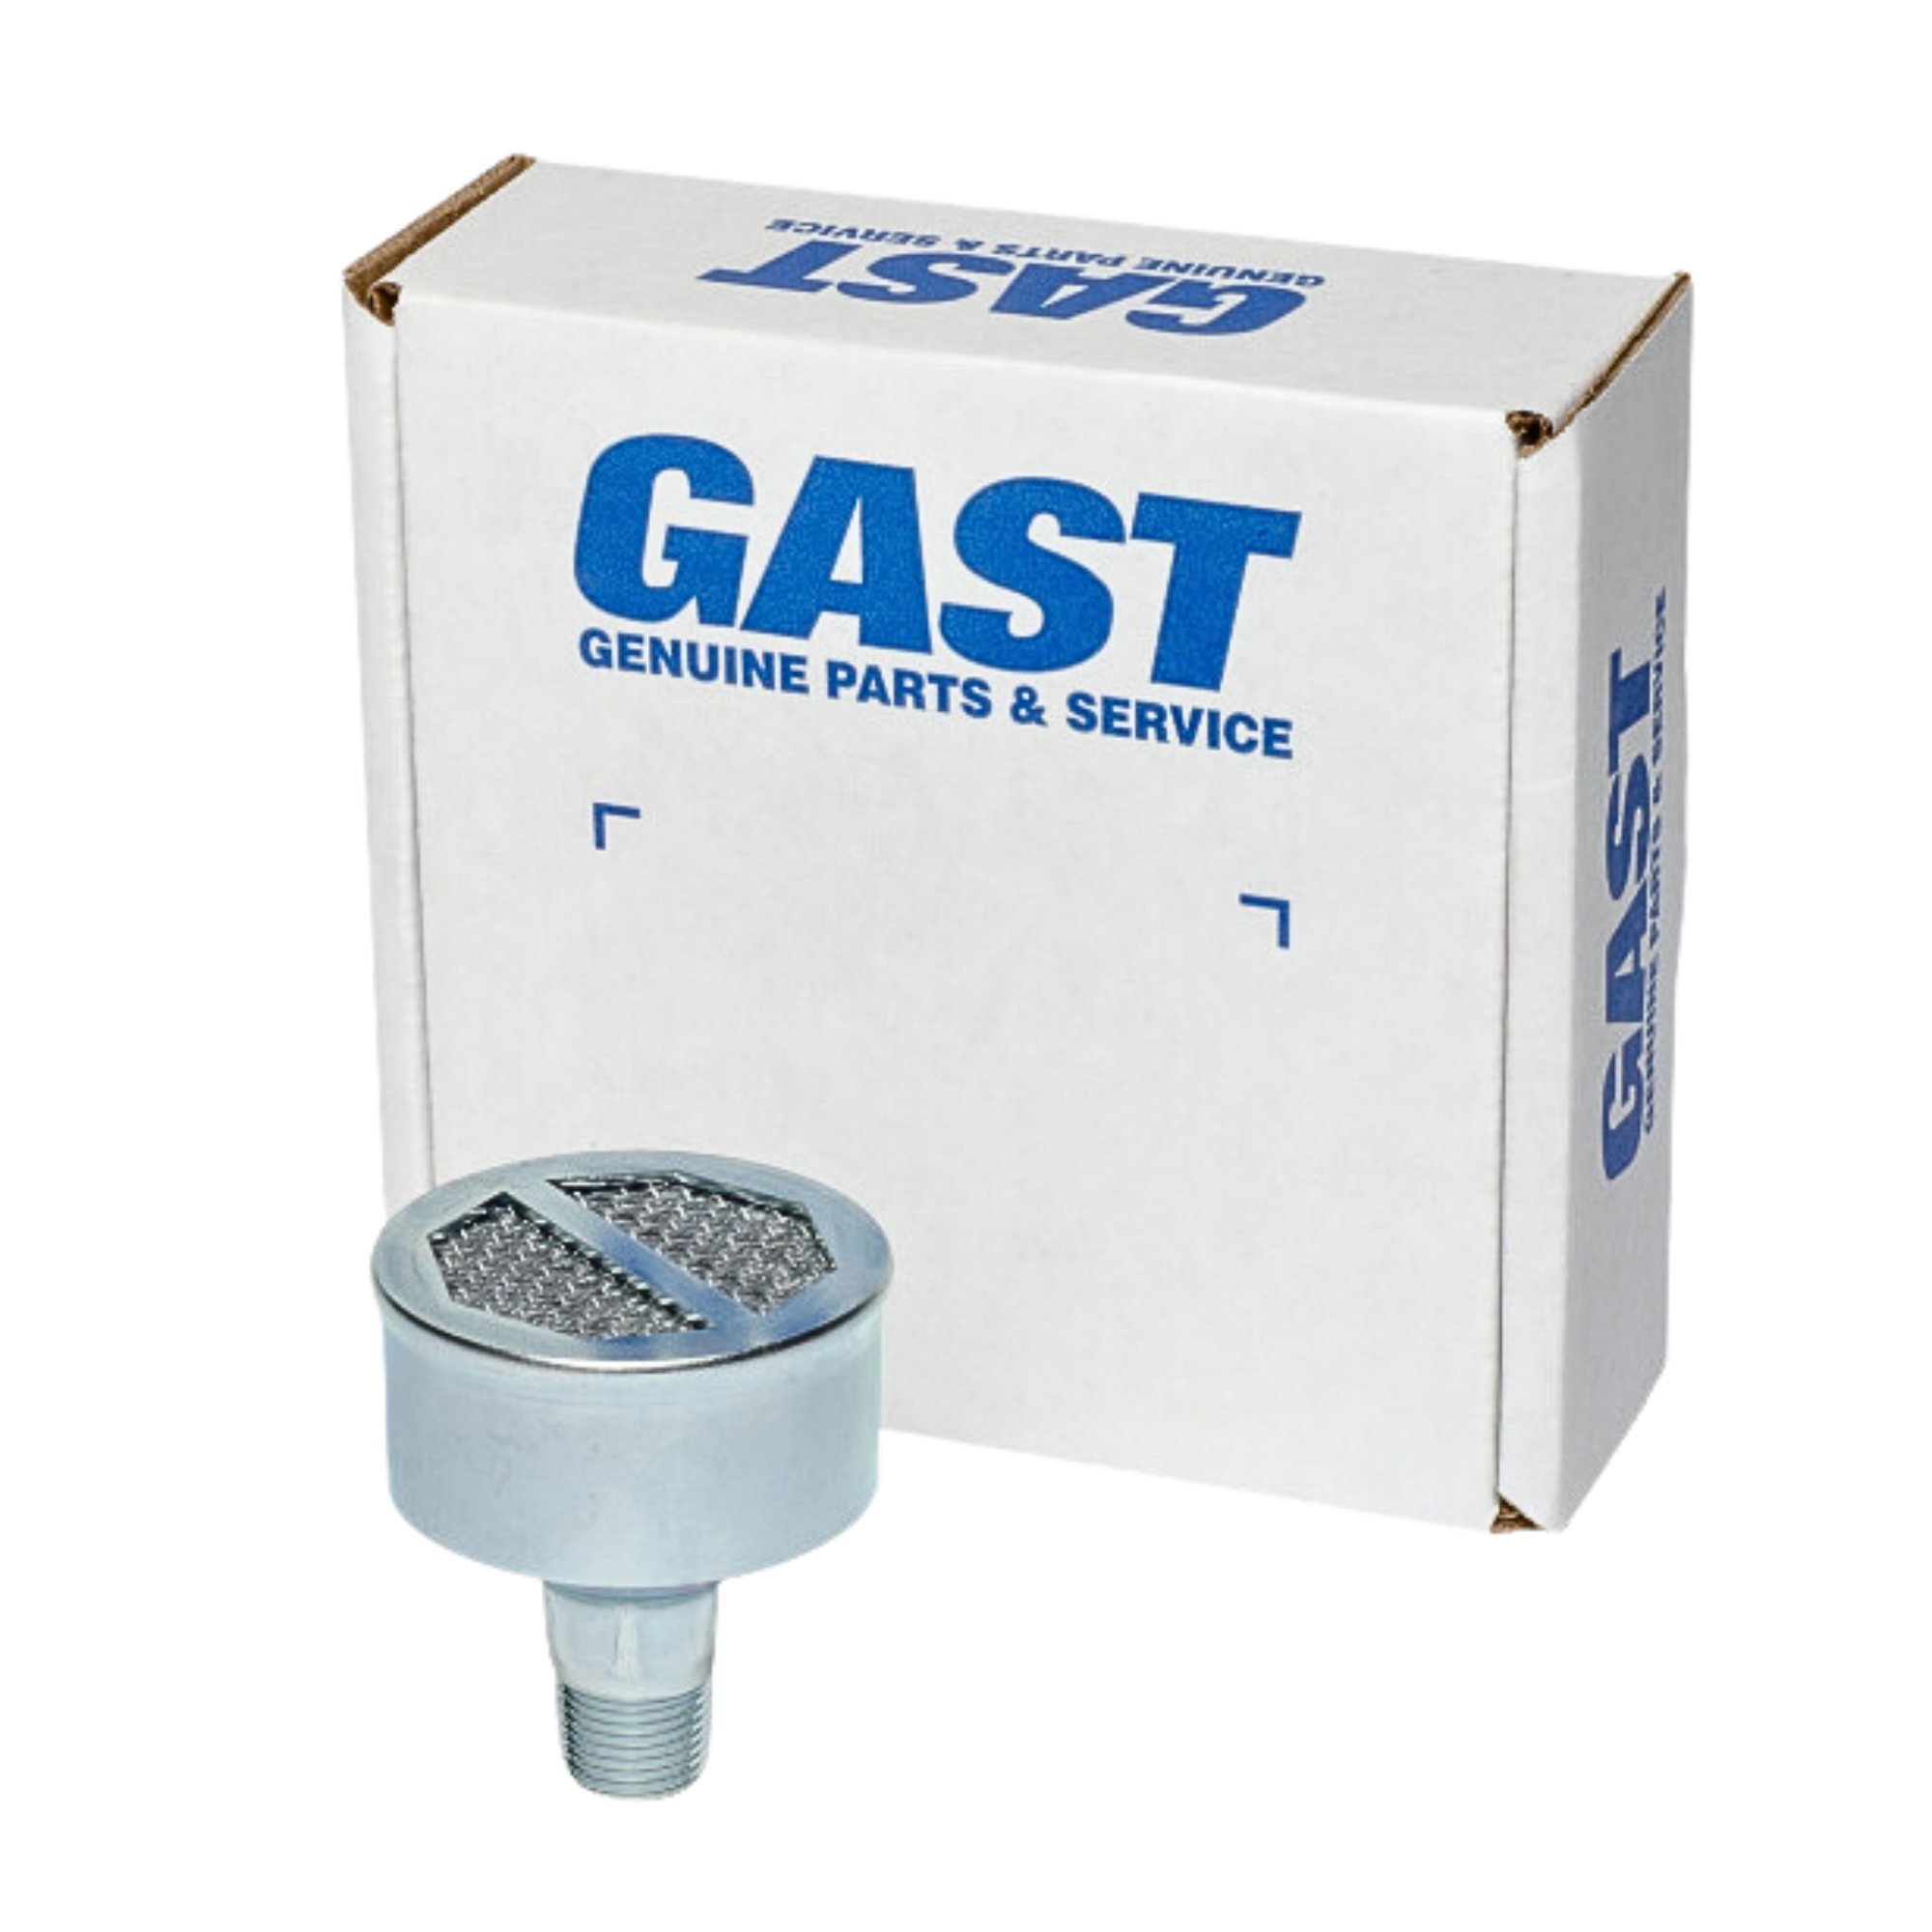 Gast | 6AM/8AM/NL52 Muffler Assembly | AC990 used on gast product line